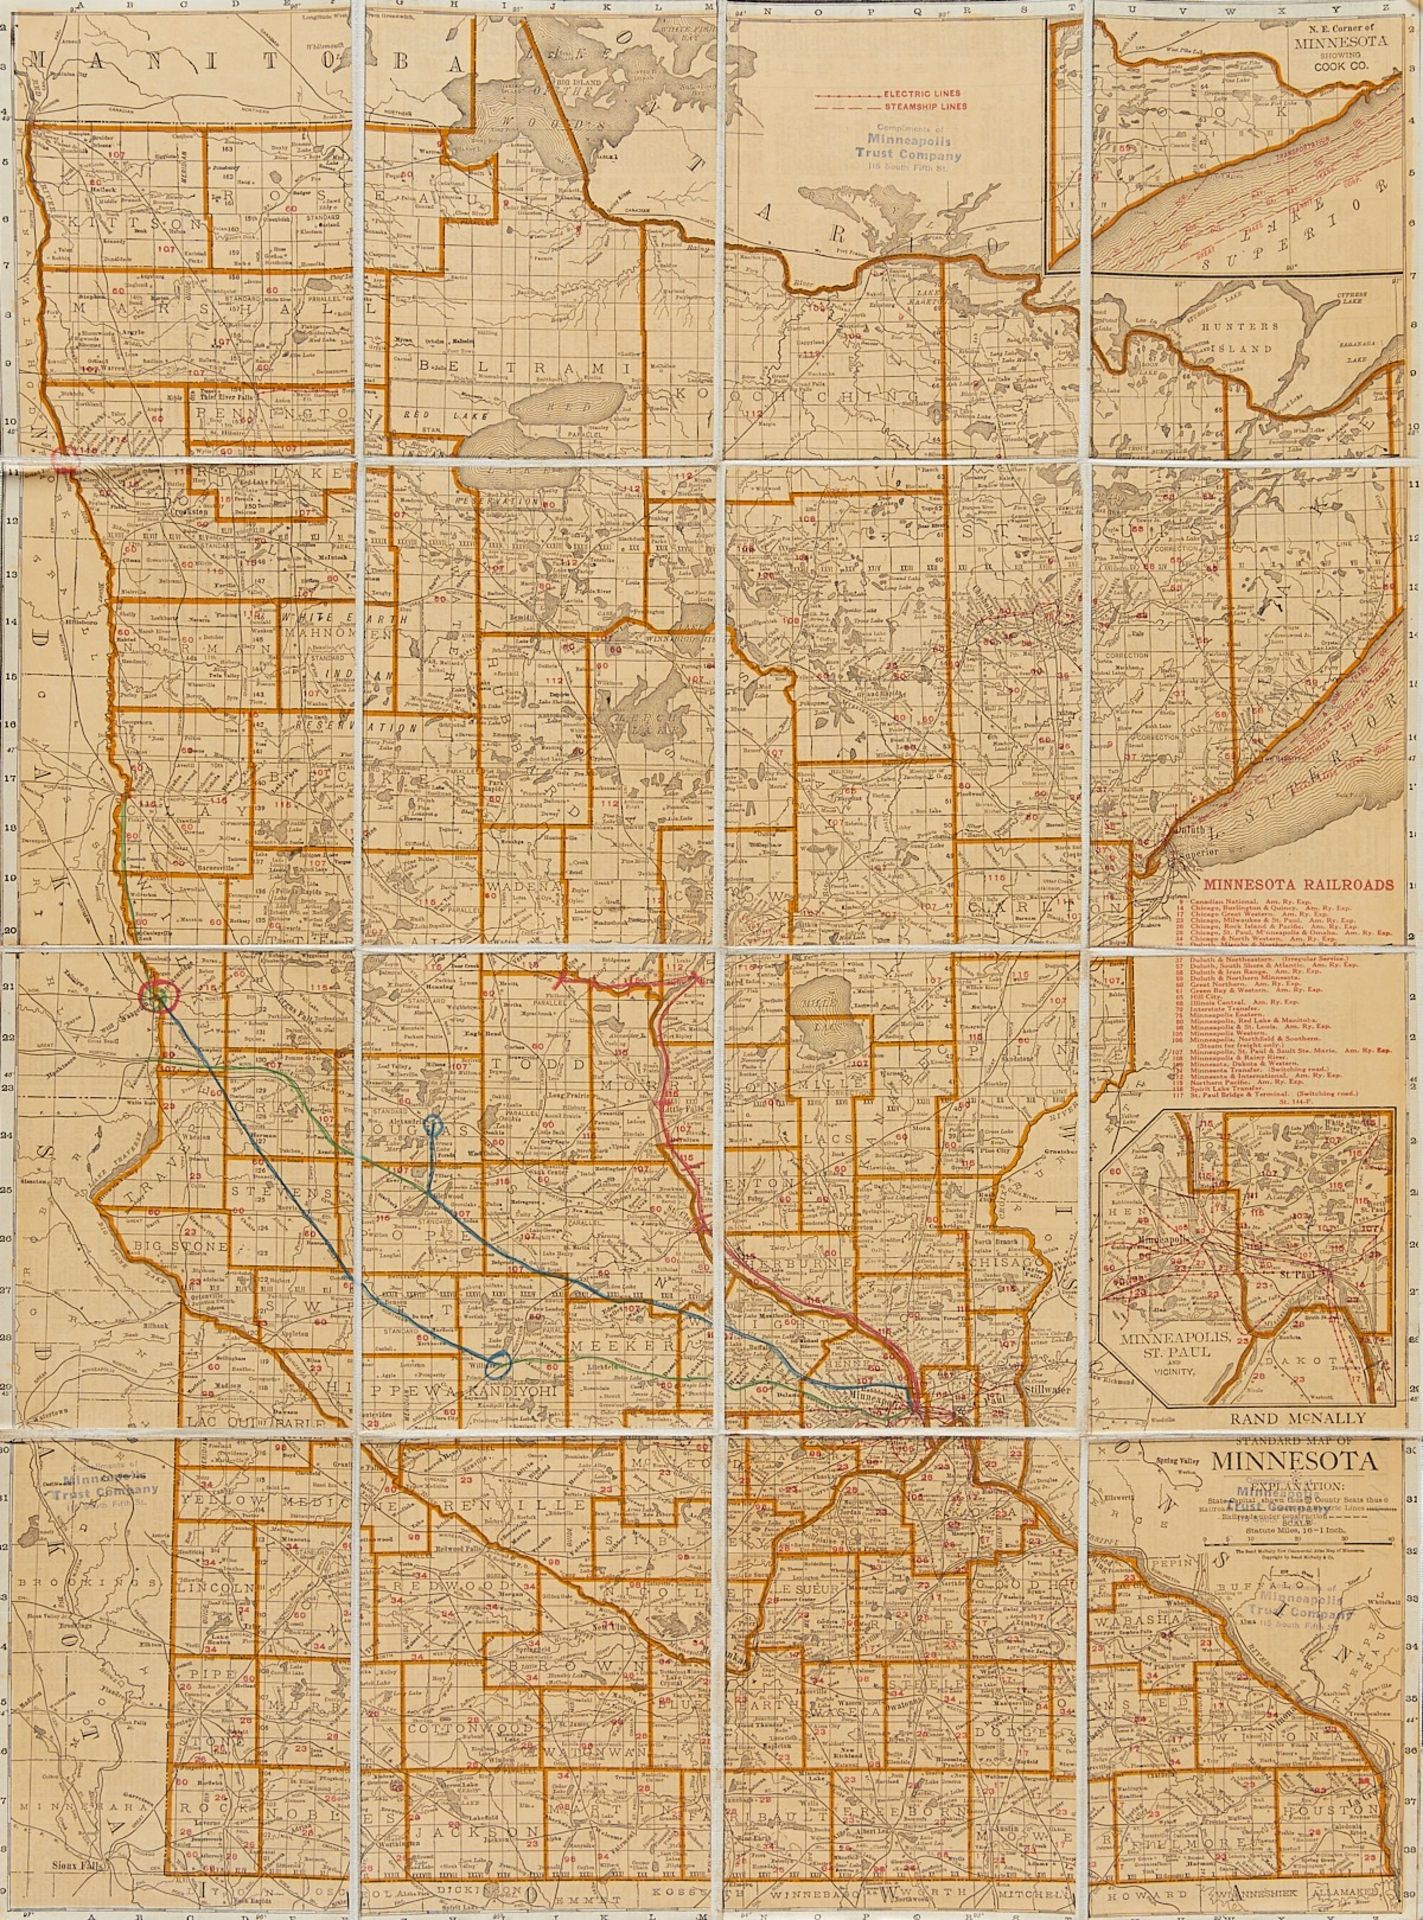 Vintage MN Map & Postmasters Photo 1926 - Image 2 of 16